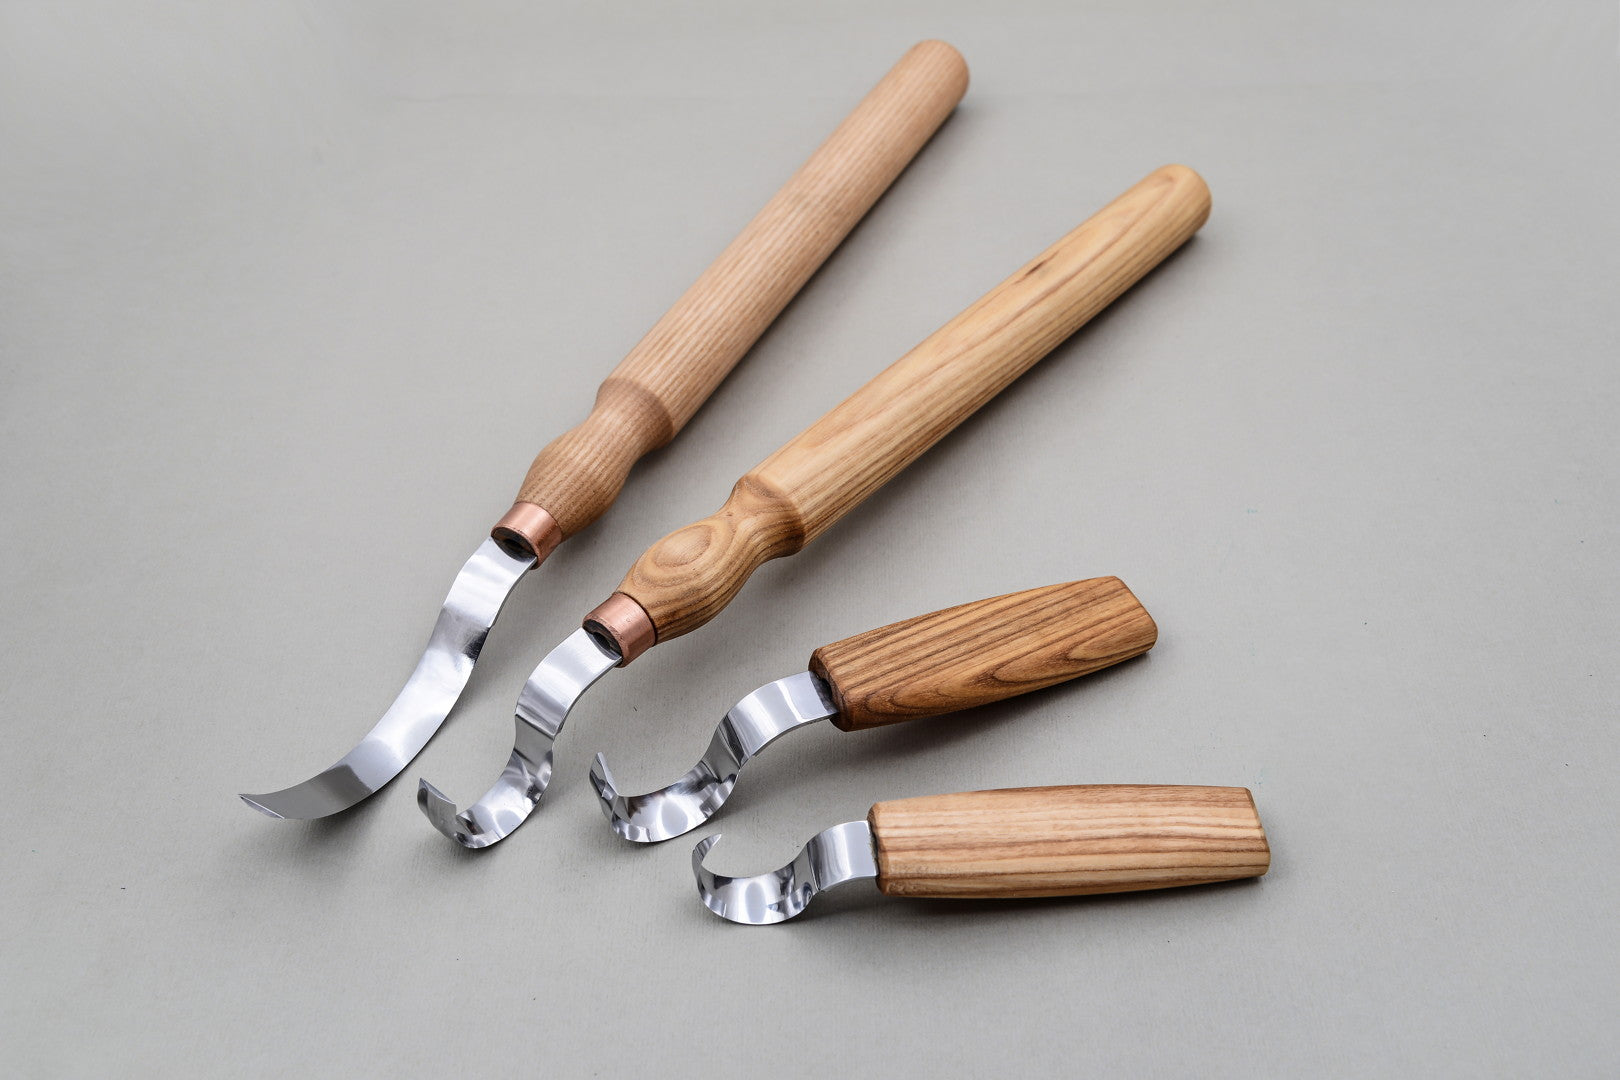 S17L - Extended Spoon and Whittle Knife Set (Left handed)